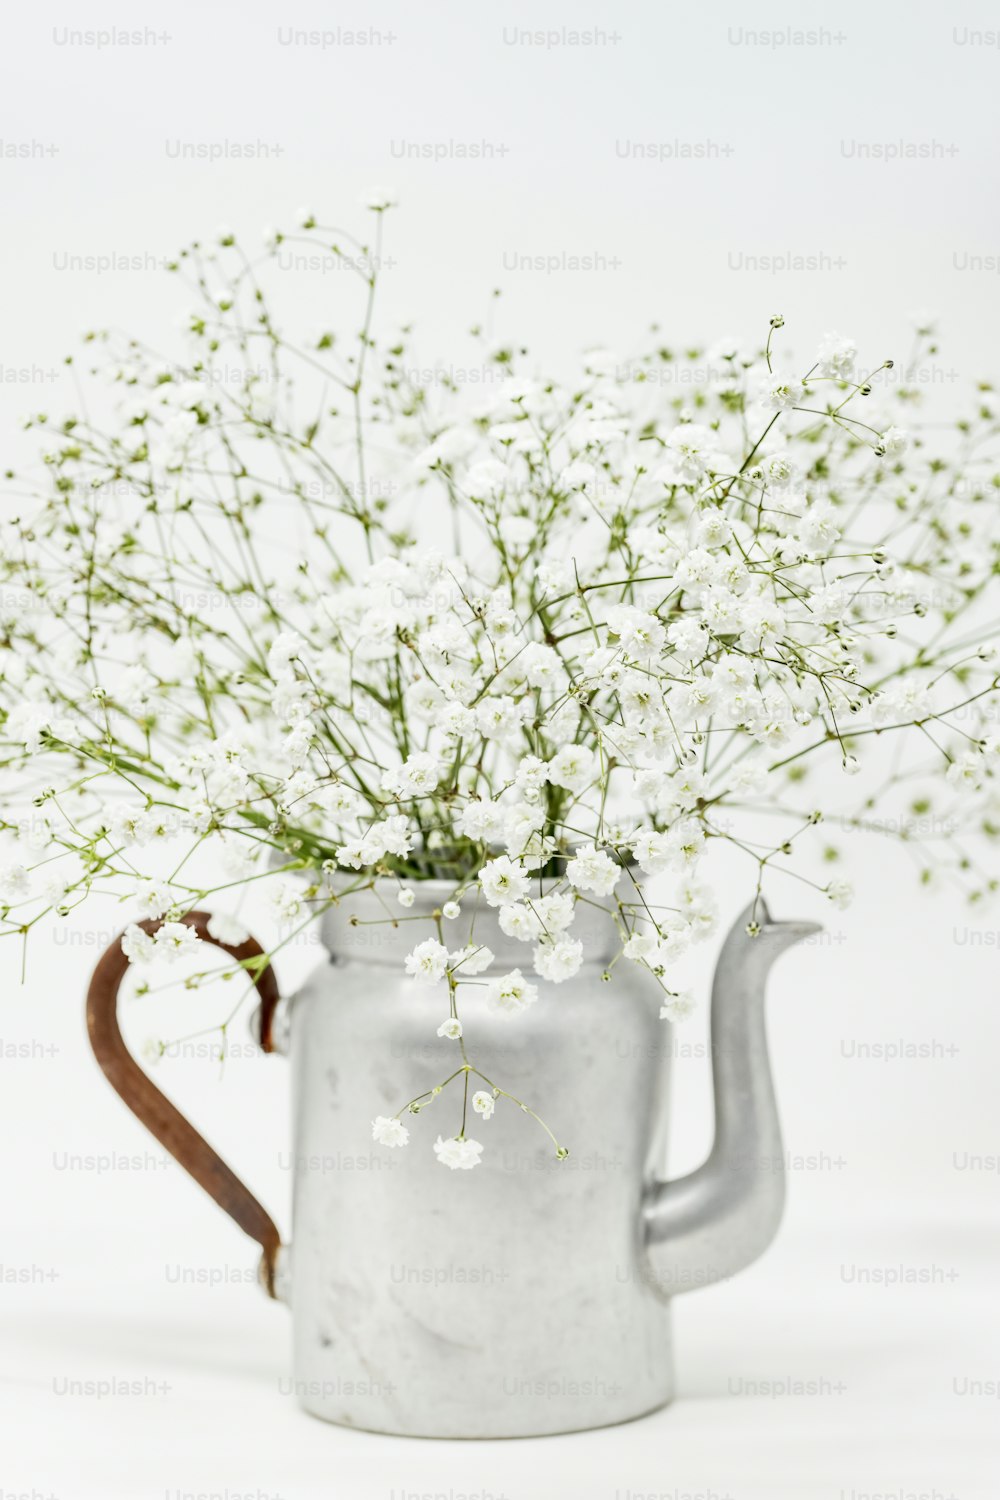 a metal watering can with white flowers in it